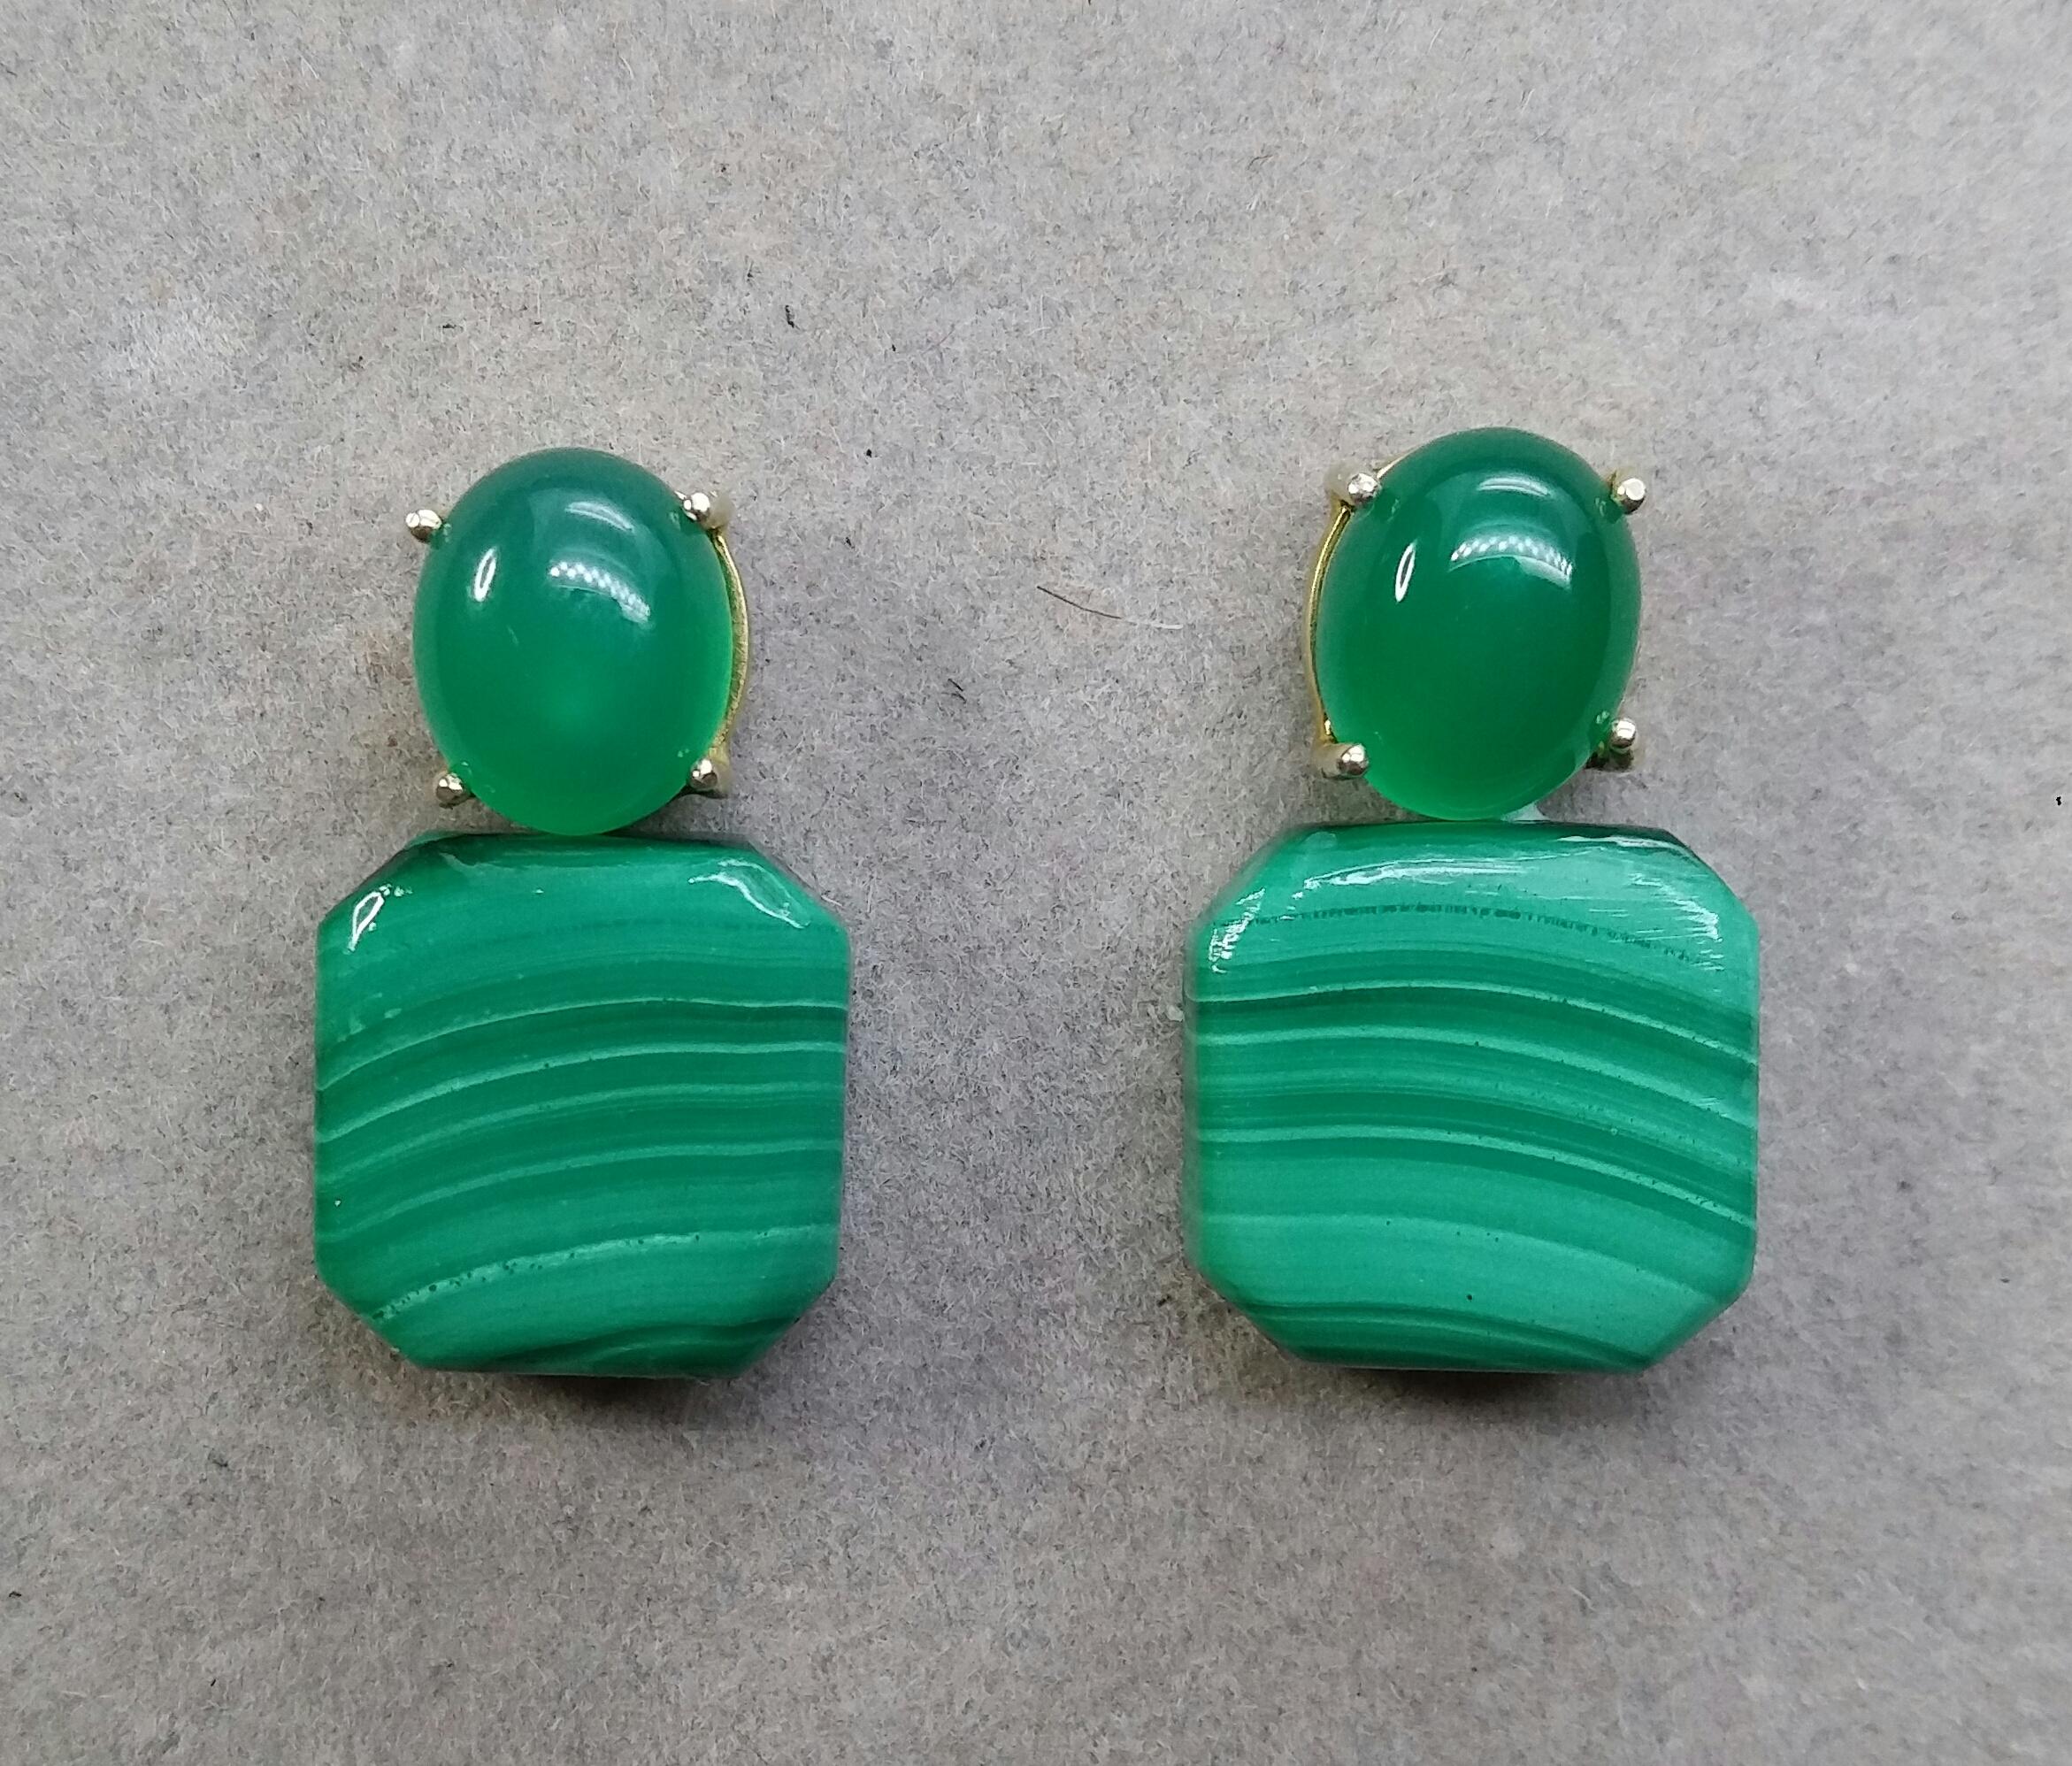 In these simple and chic earrings we have 2 Octagon Shape  Malachites measuring 16 x 16 mm.,suspended from 2 nice Natural Green Onyx  oval cabochons size 10 x 11 mm  set in 14 kt yellow gold.

In 1978 our workshop started in Italy to make